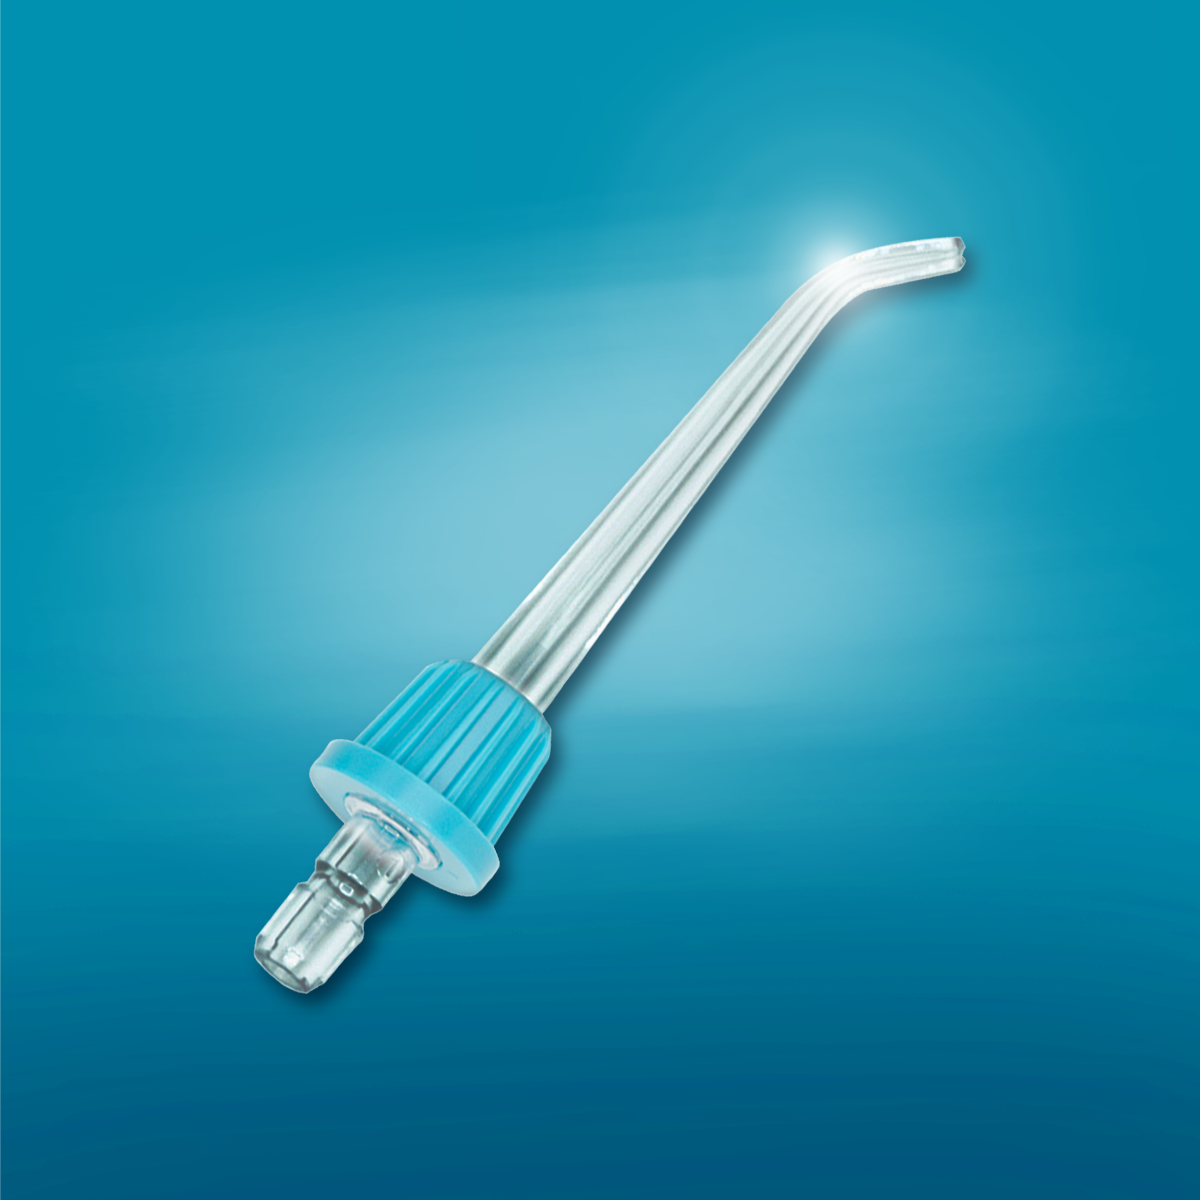 A nasopharyngeal airway device on a blue background.